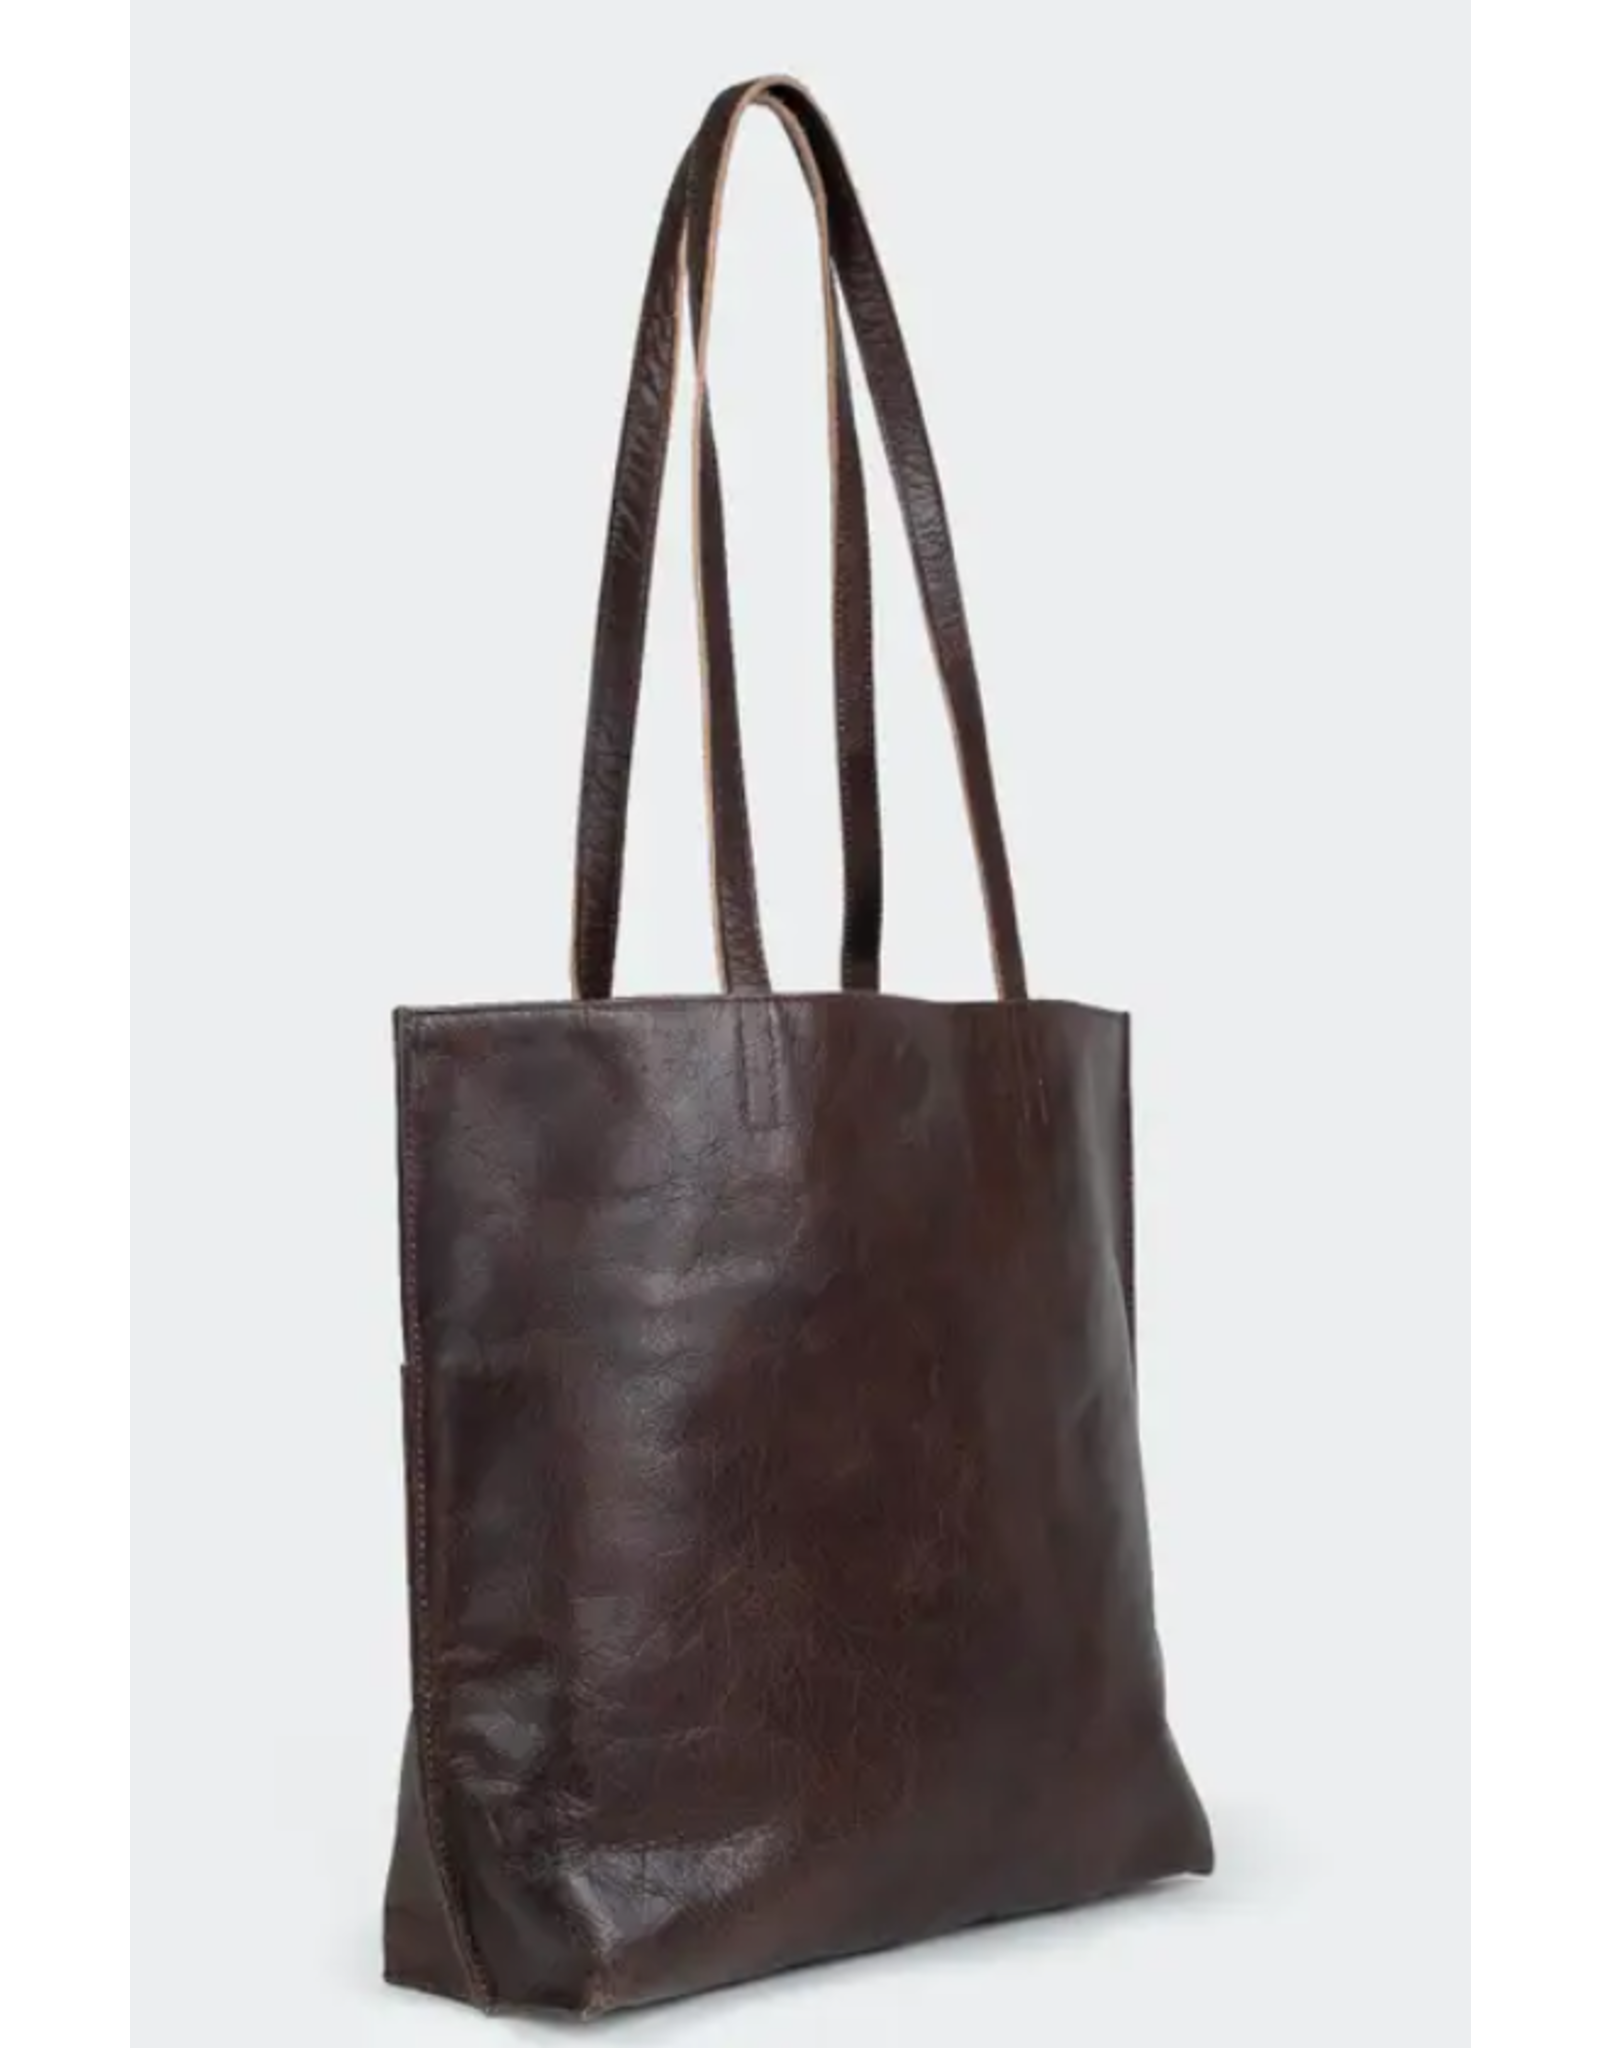 India The Everyday Tote in Heritage Brown, India